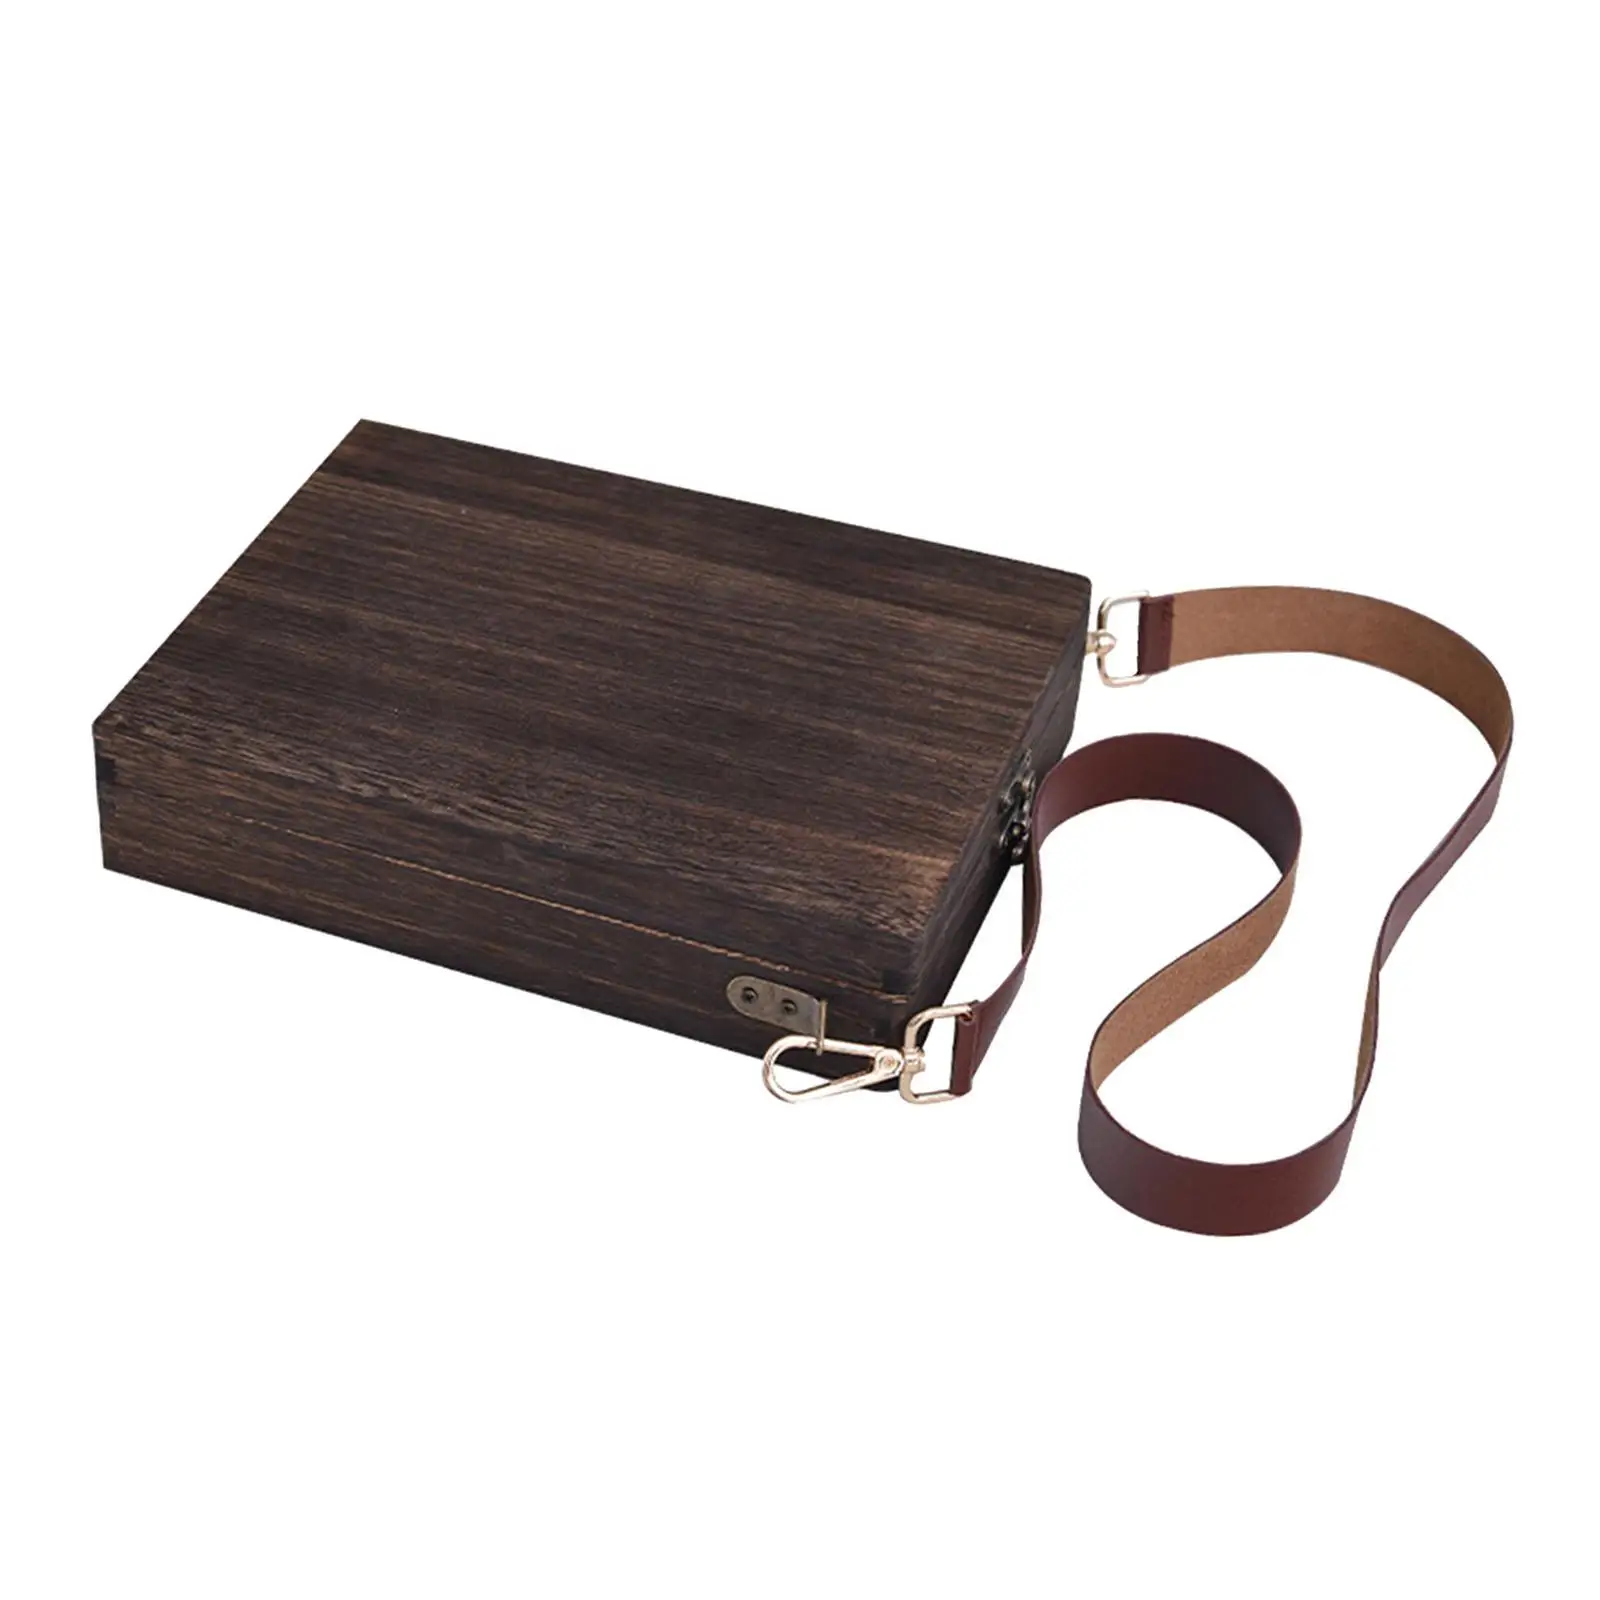 Writers Messenger Wood Box Wooden Box Writers Box Trend Shoulder Bag for Outdoor